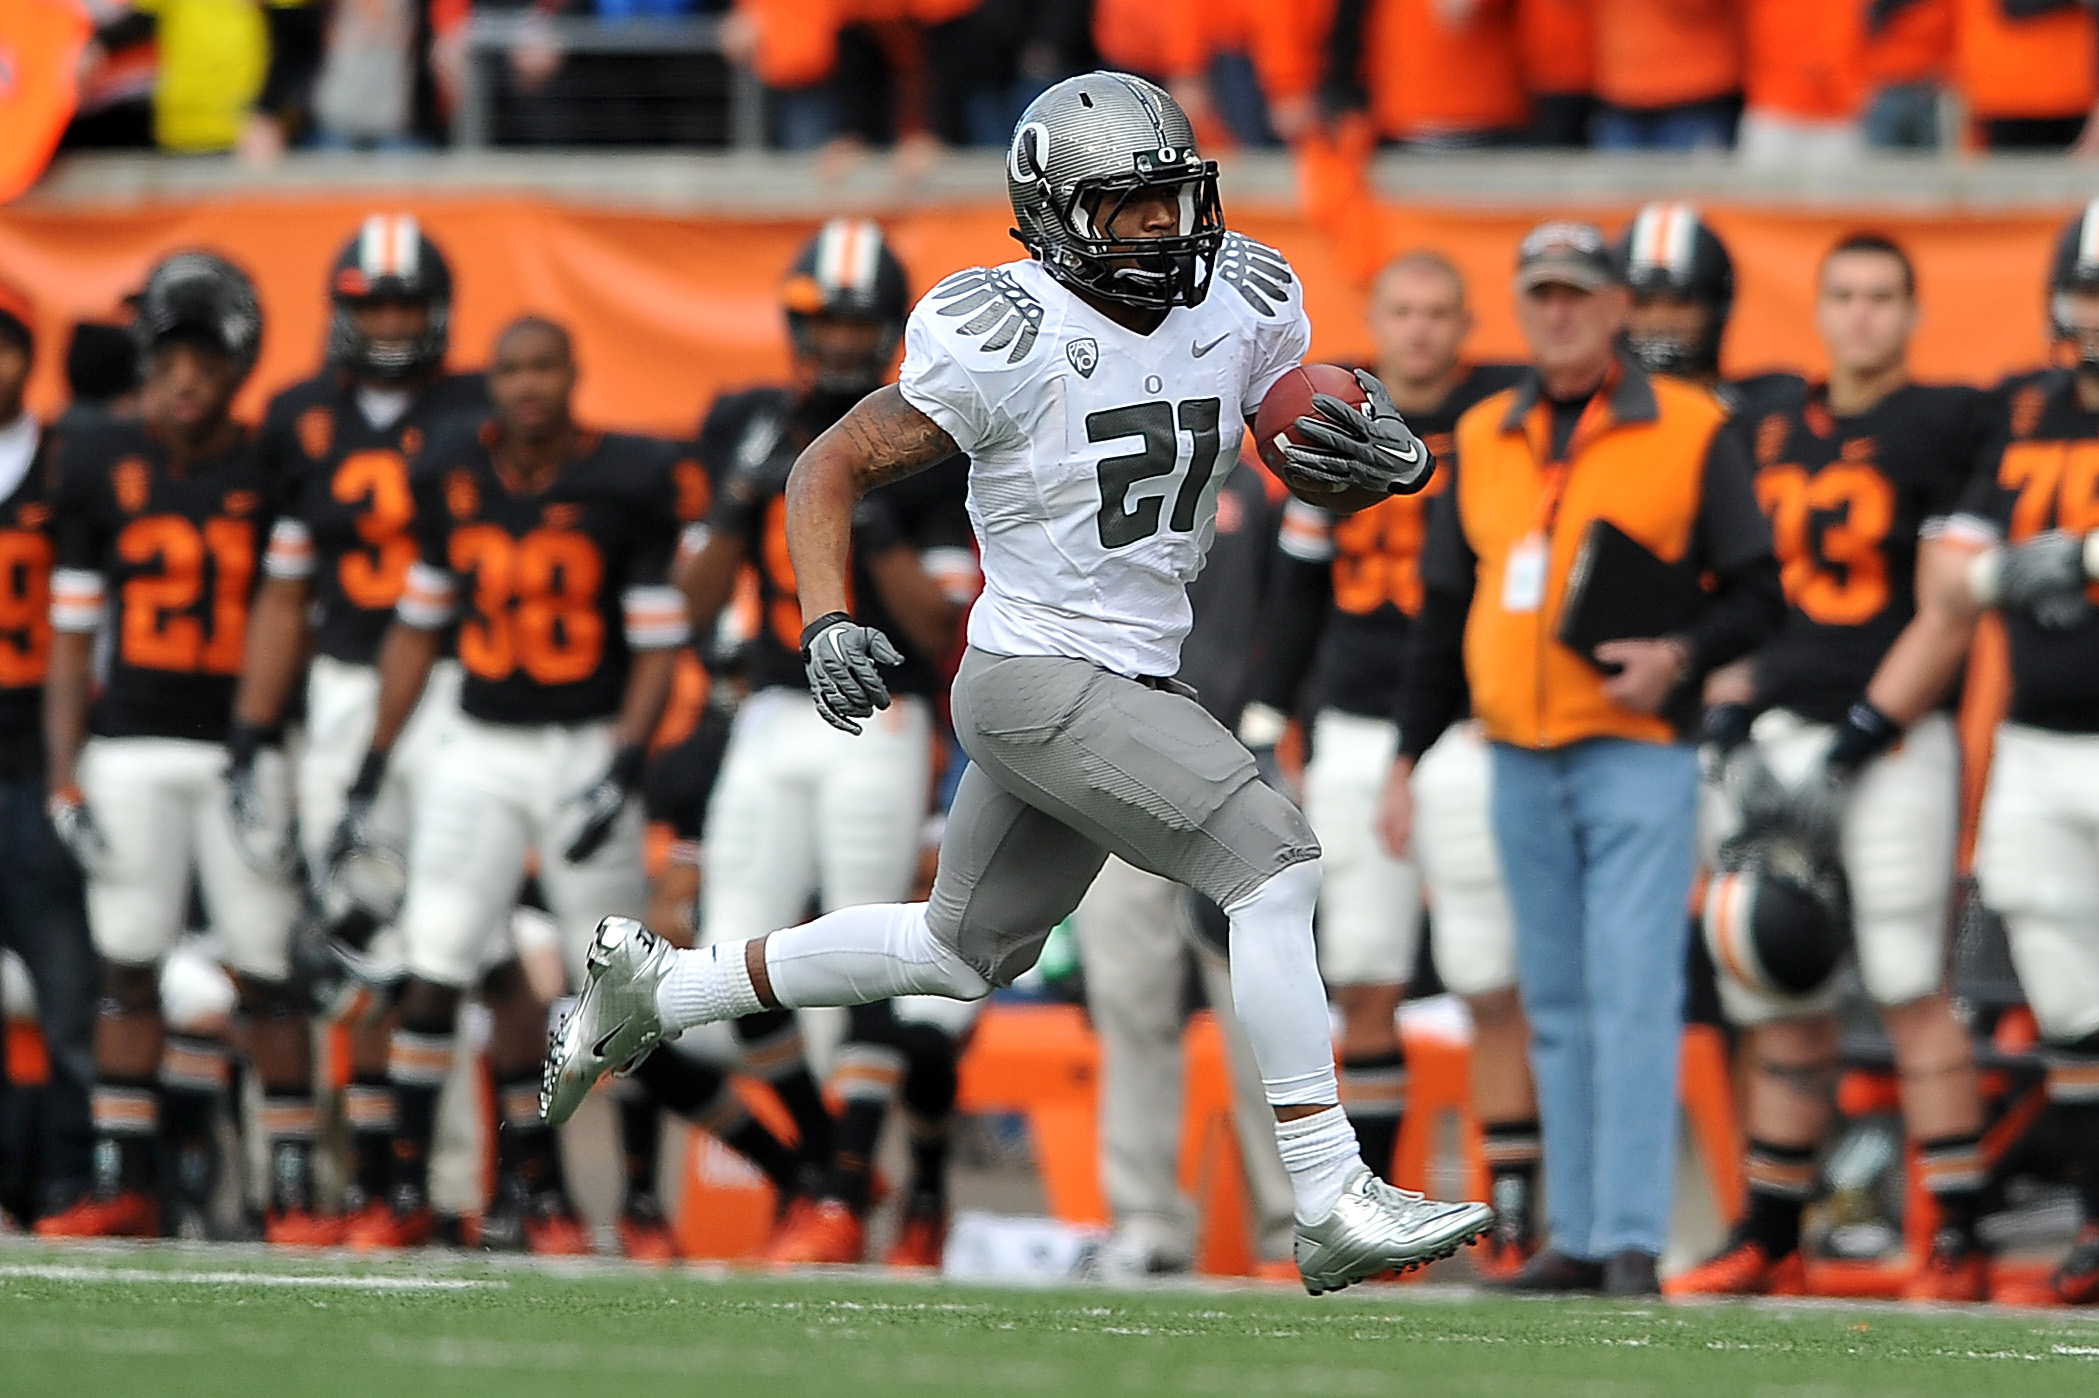 CORVALLIS, OR - DECEMBER 4: Running back LaMichael James #21 of the Oregon Ducks runs with the ball in the second quarter of the game against the the Oregon State Beavers at Reser Stadium on December 4, 2010 in Corvallis, Oregon. The Ducks beat the Beaver